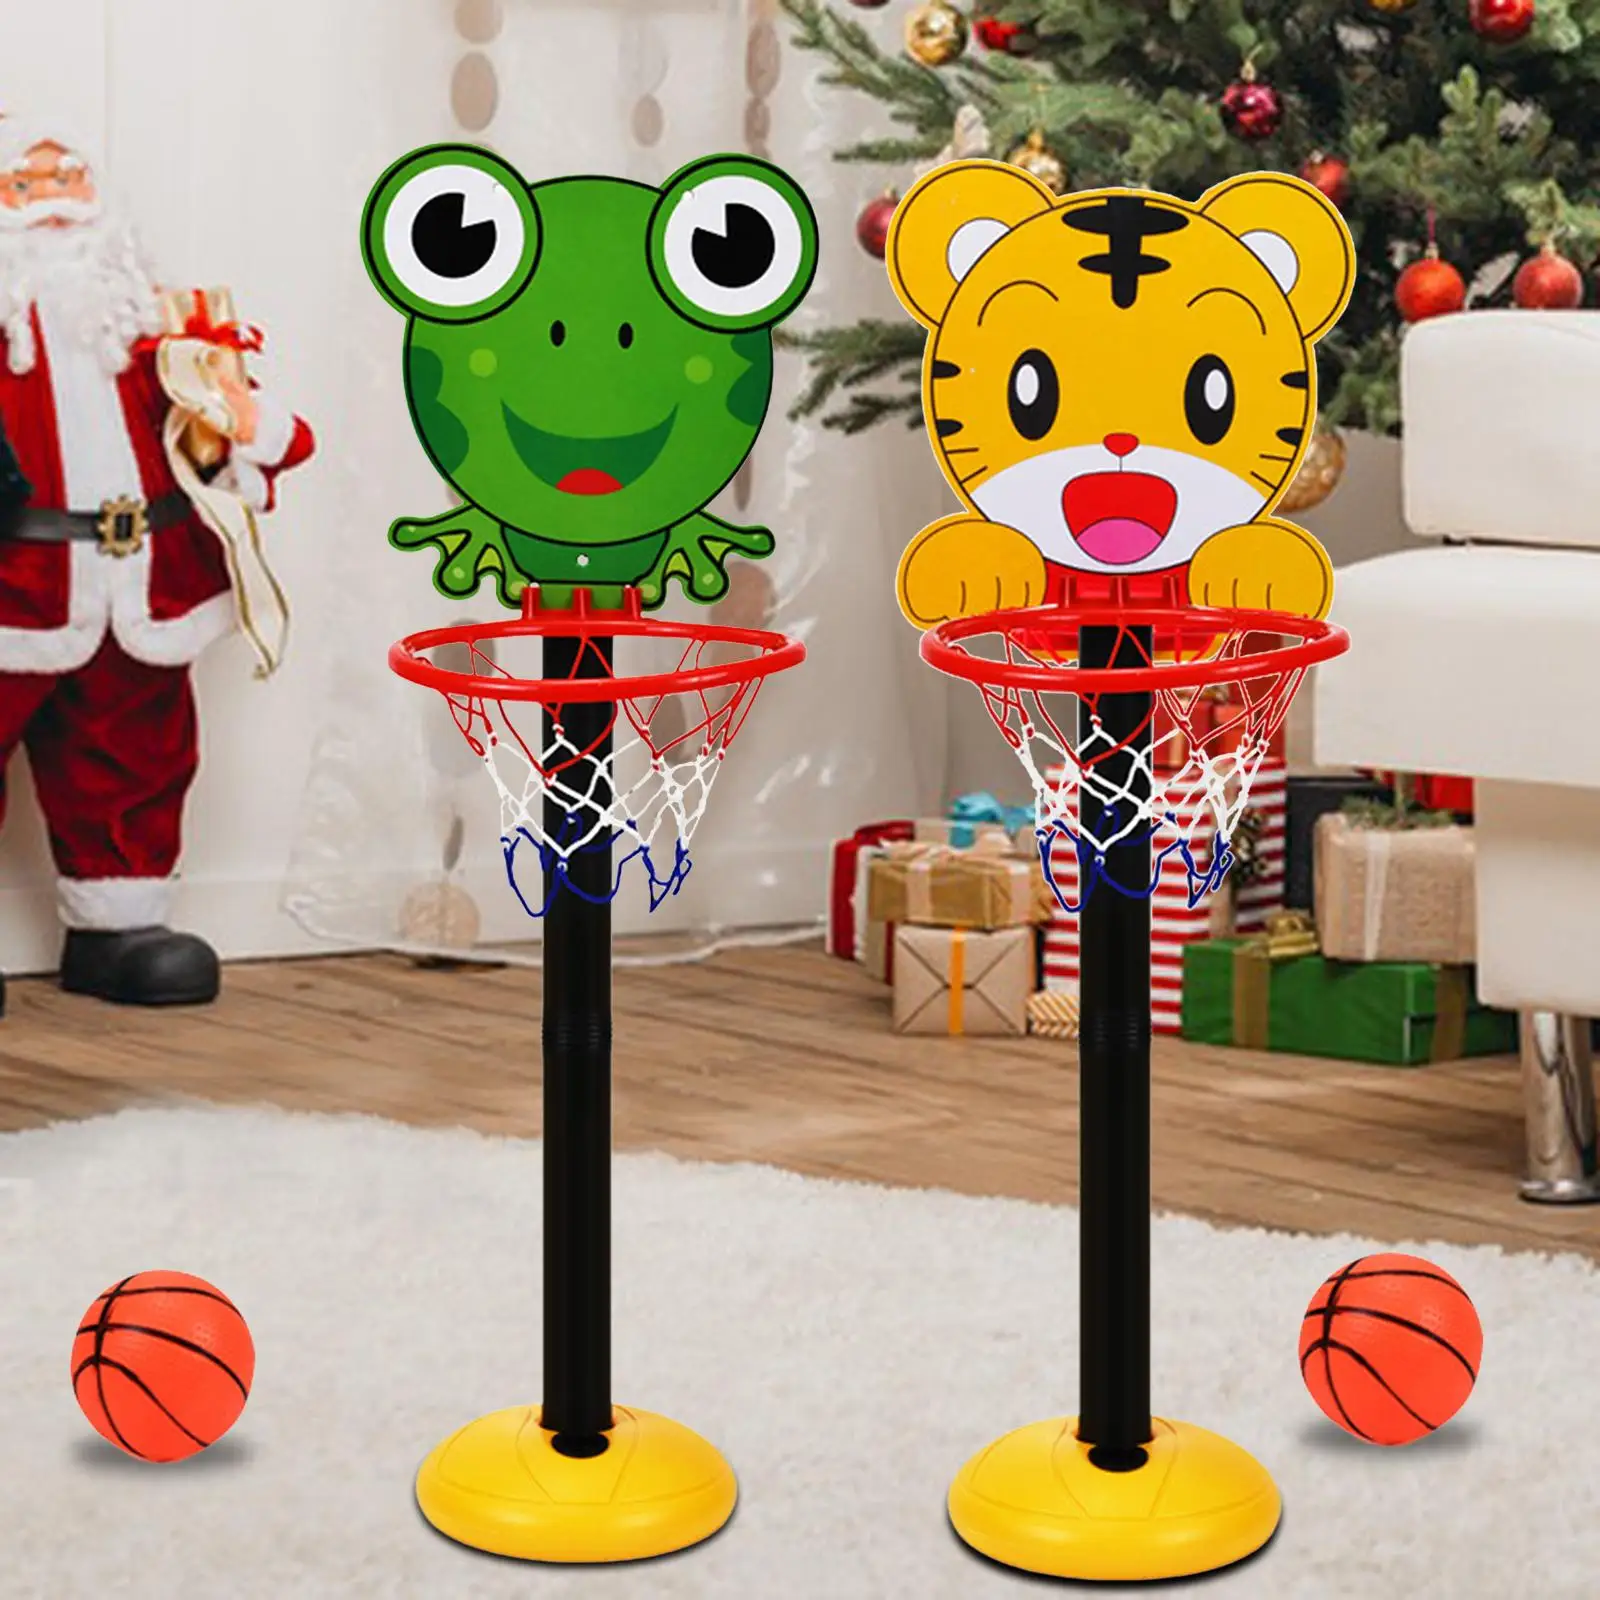 Portable Basketball Hoop Stand Adjustable and Ball Game Animals Sport Board with Net for Kids Toddler Children Yard Play